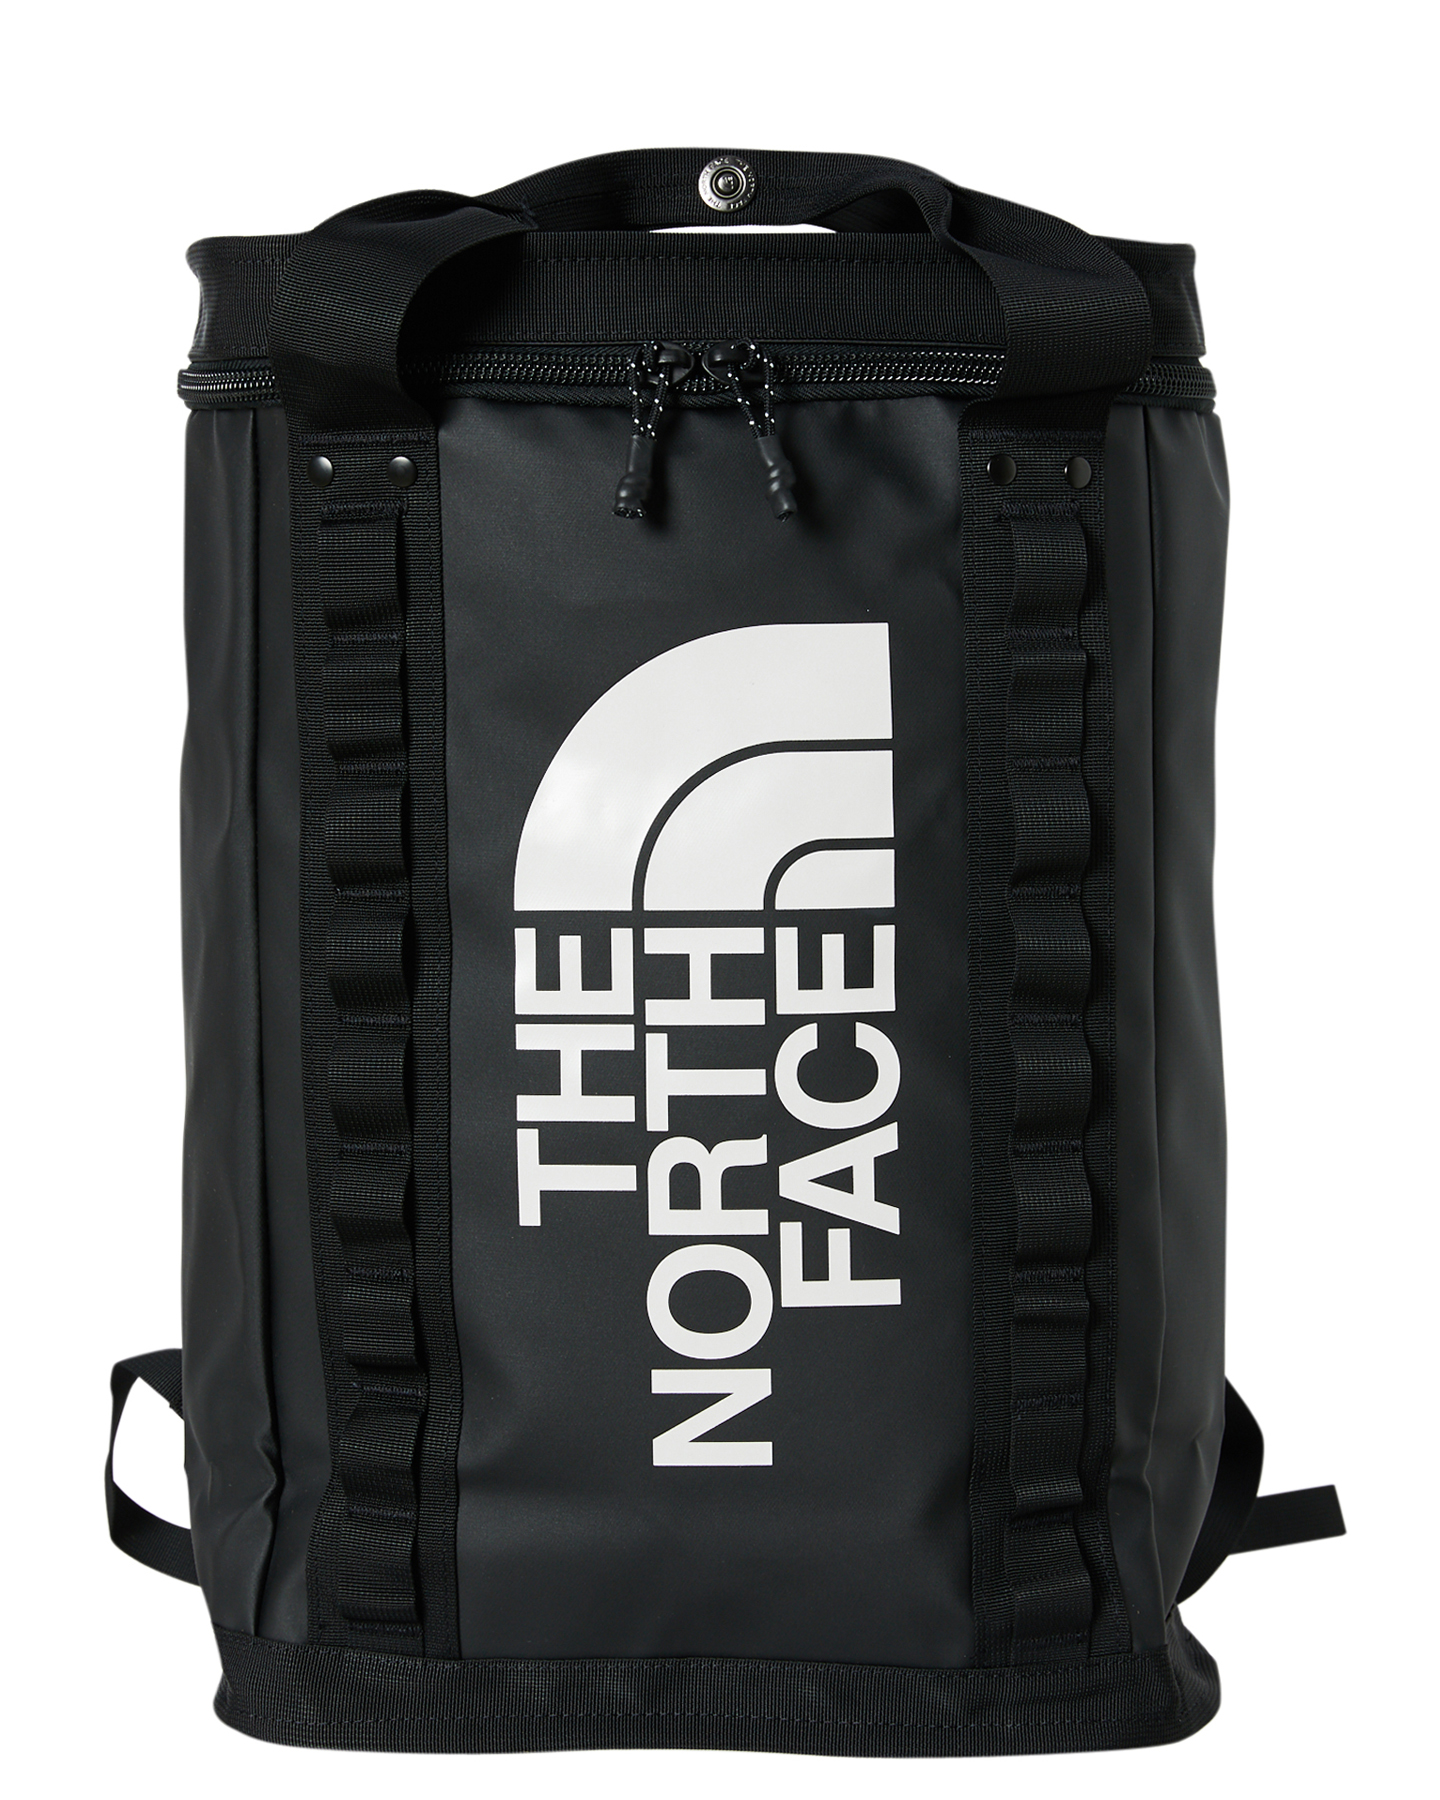 north face 26l backpack